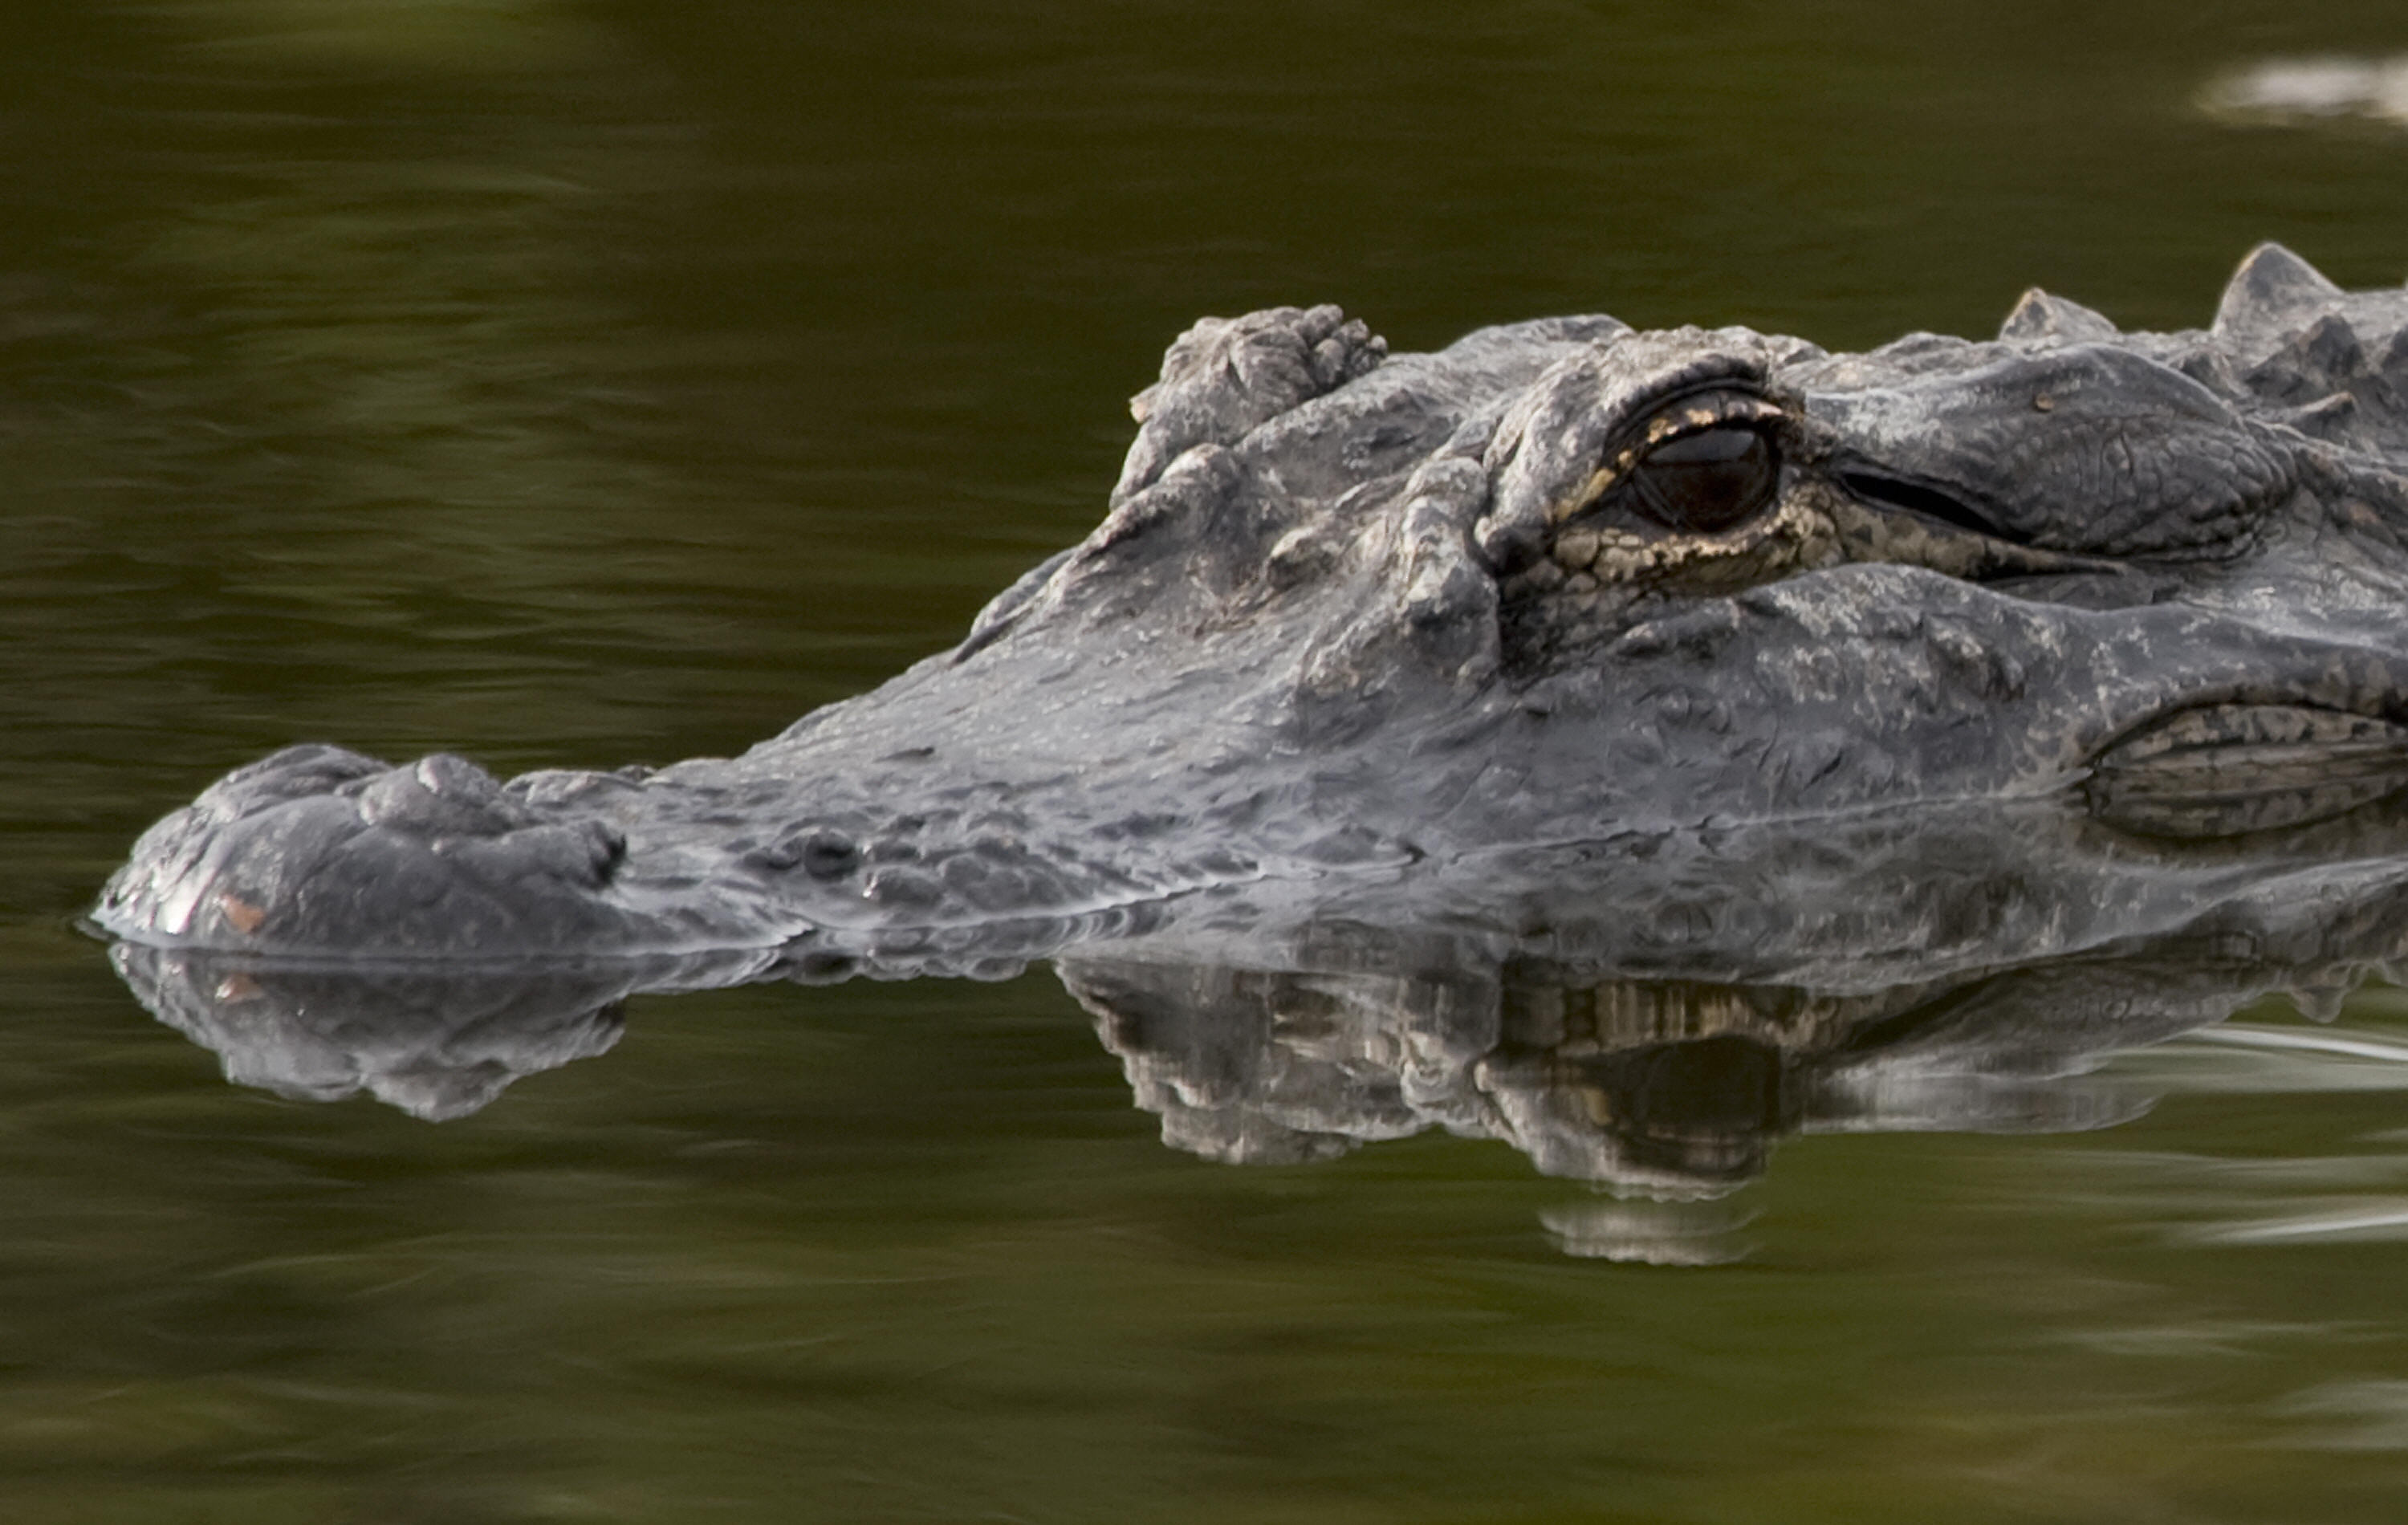 An American Alligator sits in a waterway at the Merritt Island National Wildlife Refuge March 27, 2009 in Titusville, Florida. (Getty)